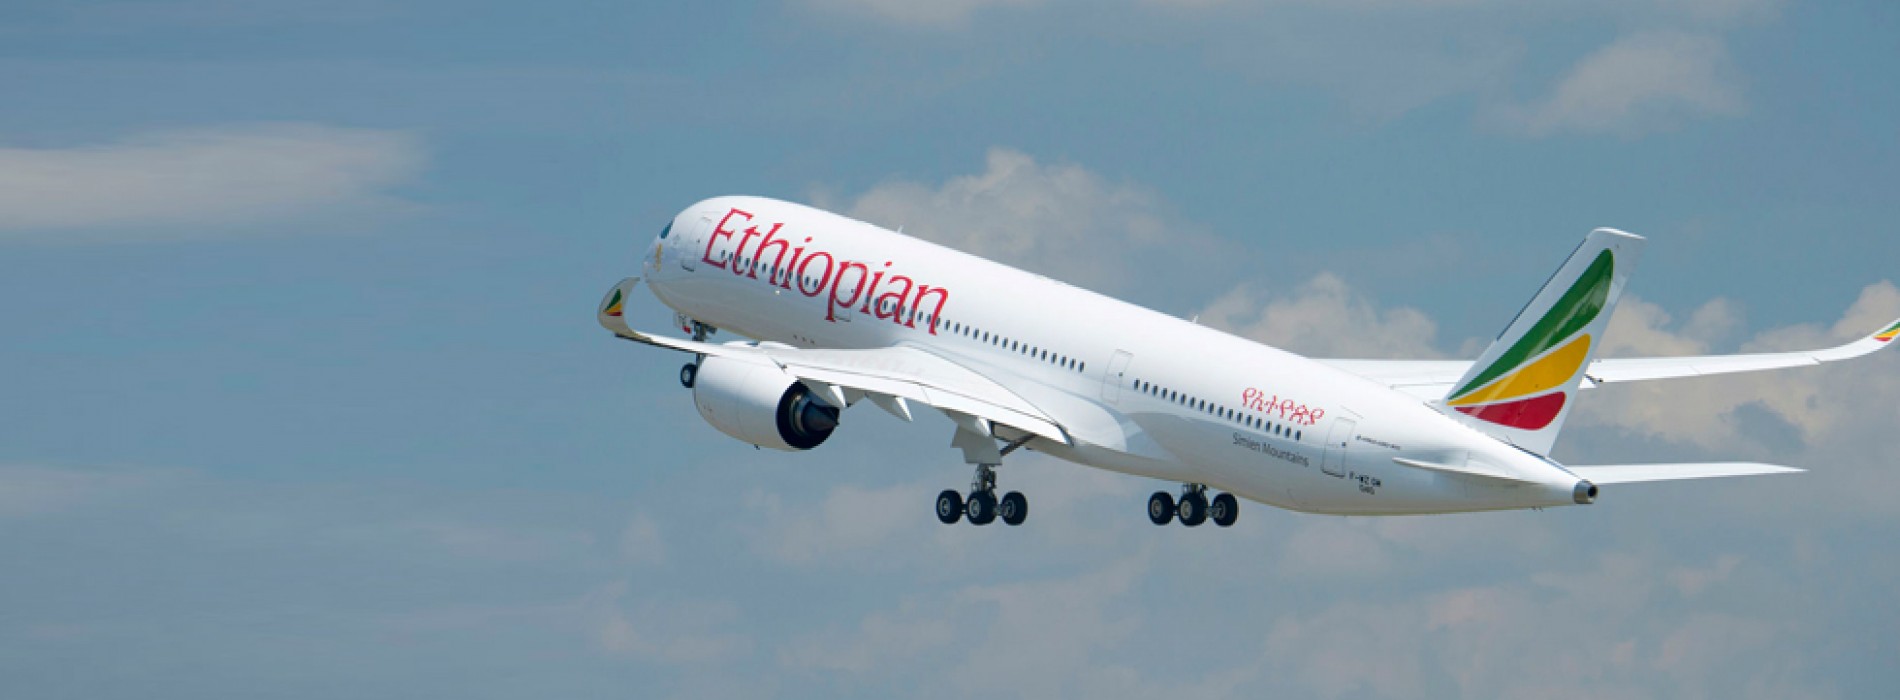 Ethiopian sets yet another year of growth milestones